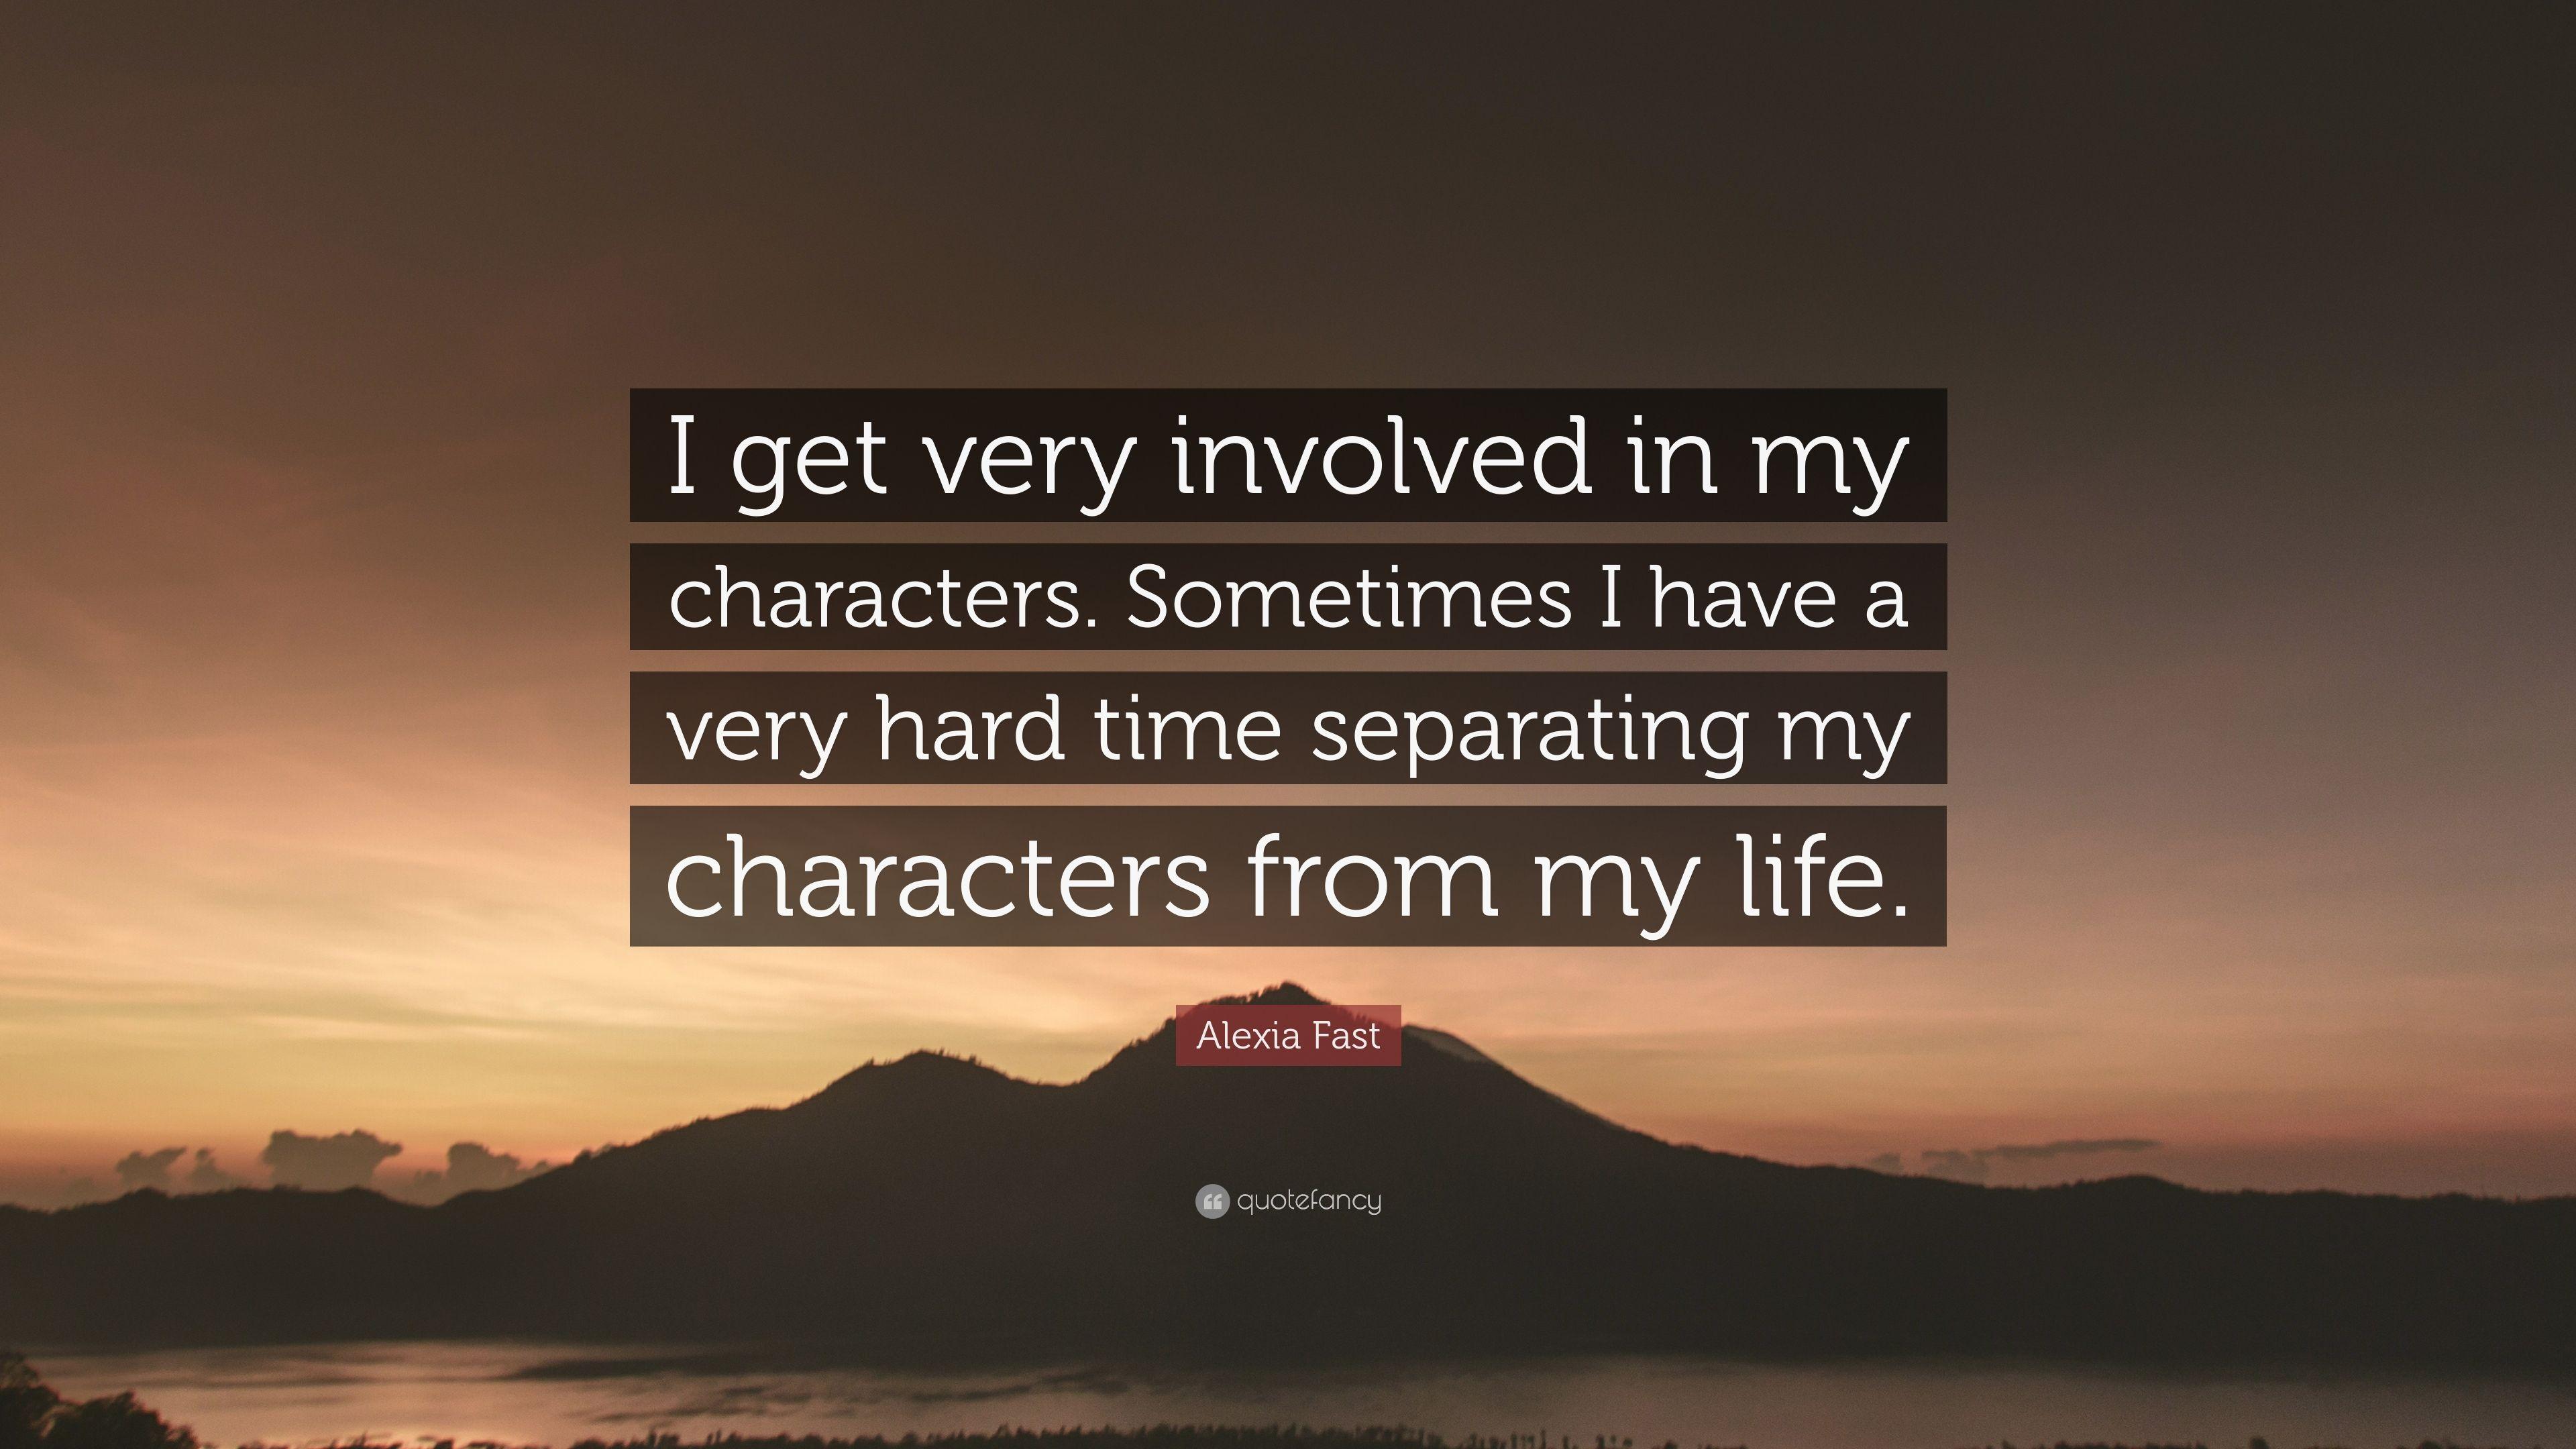 Alexia Fast Quote: "I get very involved in my characters. 